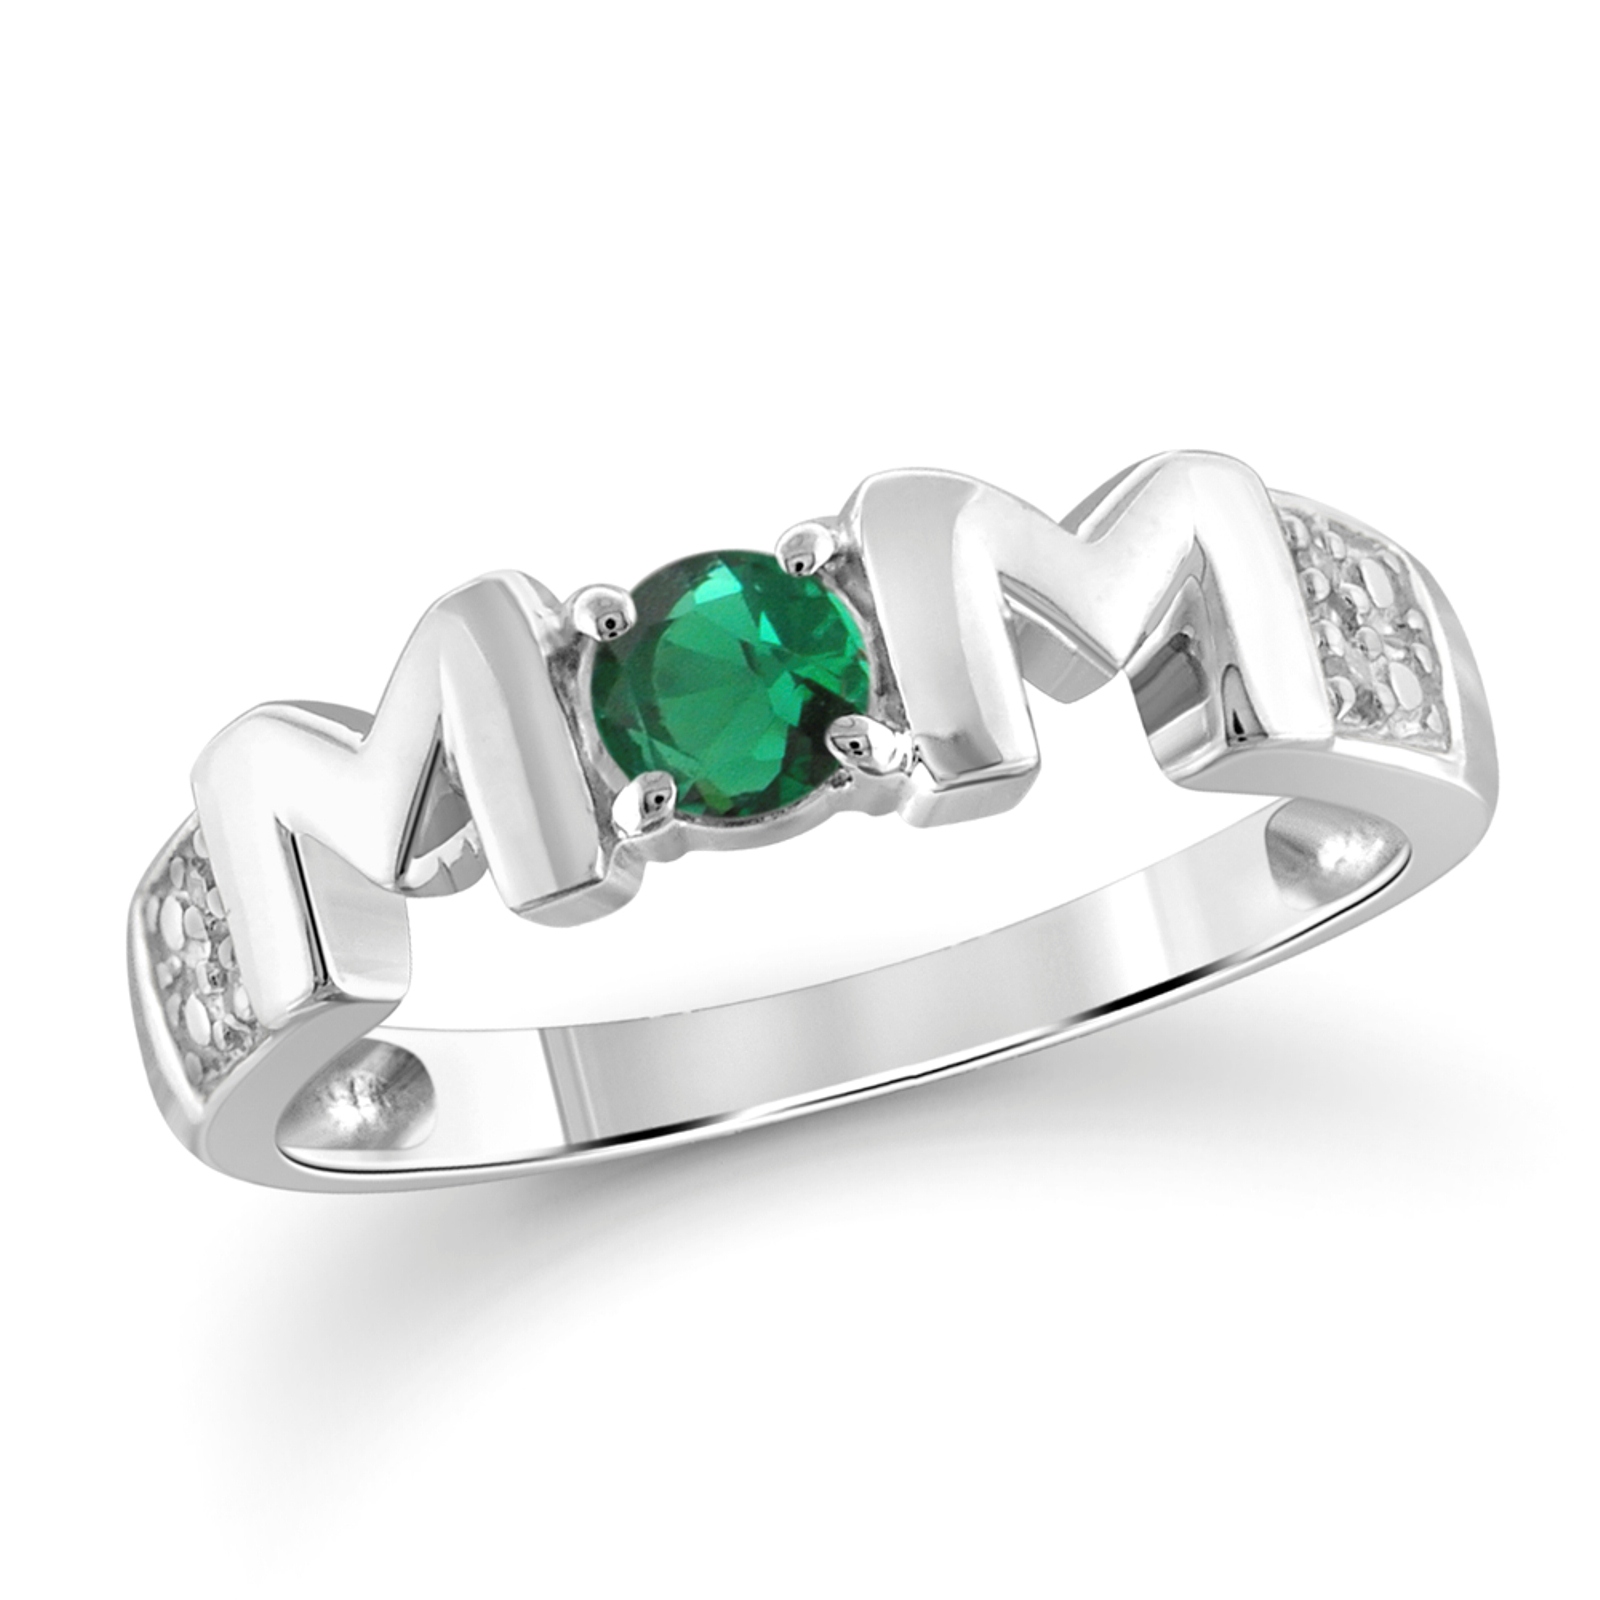 Sterling Silver and Emerald MOM Ring—$31.99!